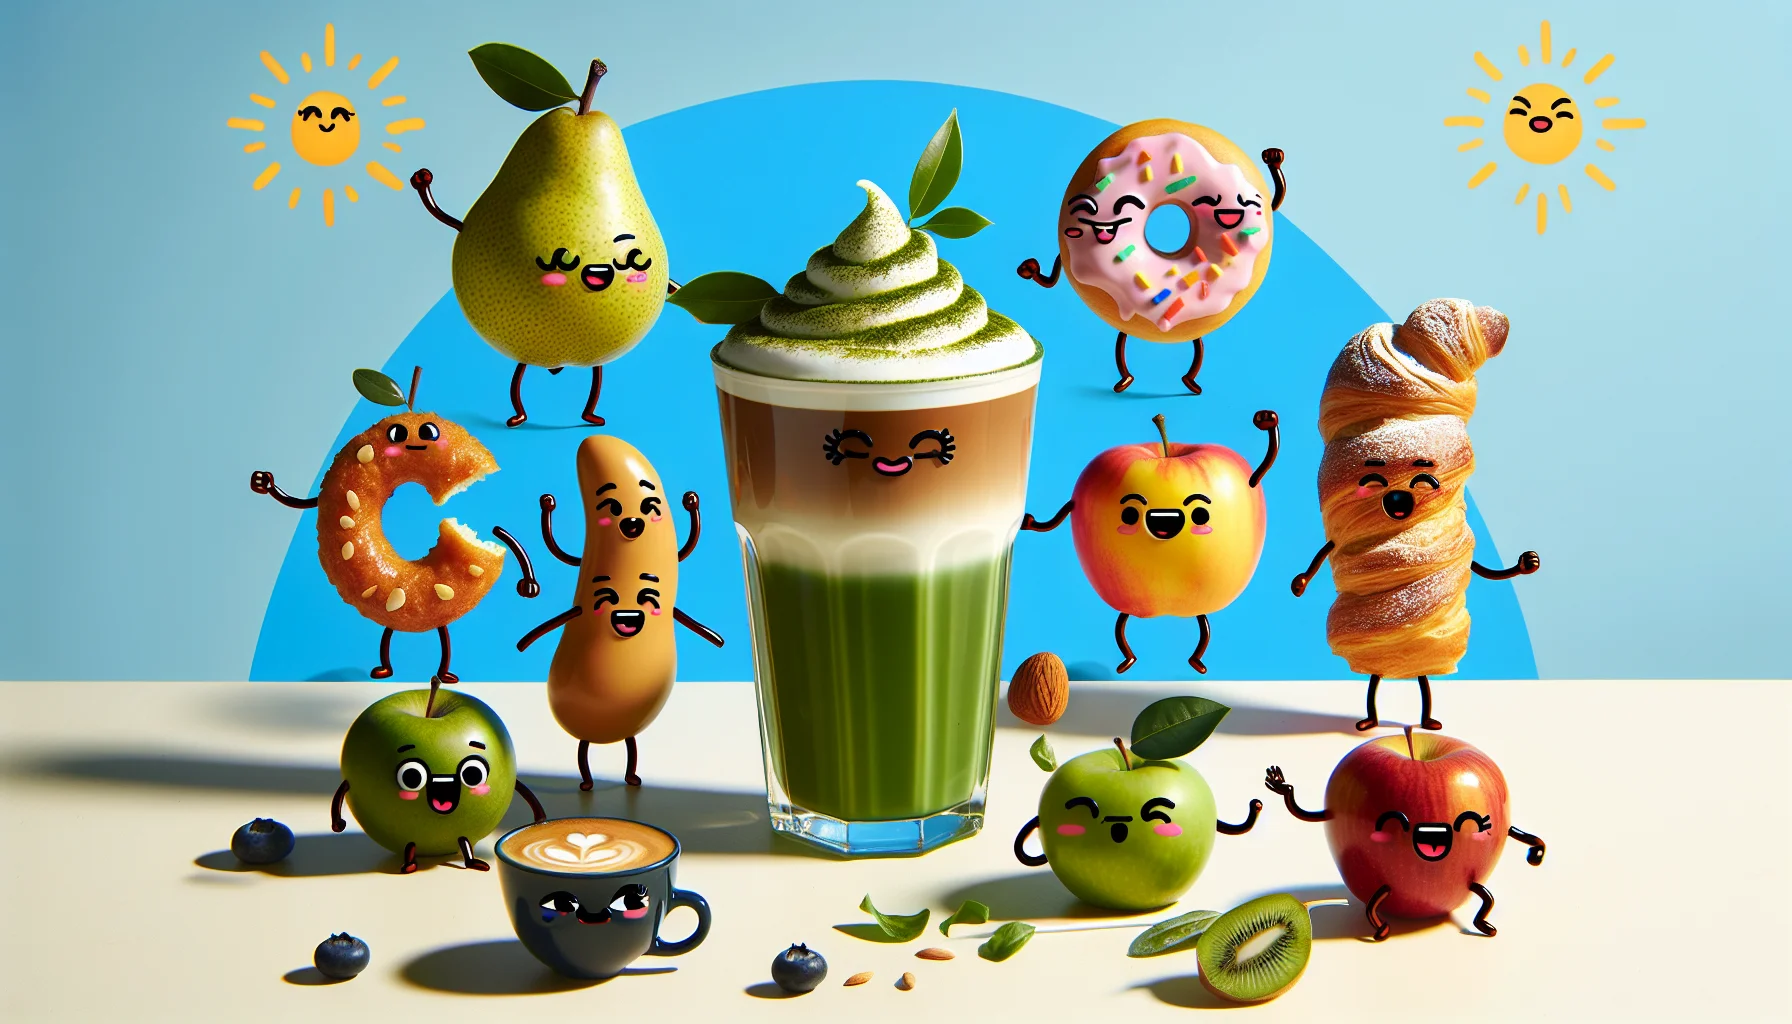 Imagine this: An aesthetically pleasing dirty matcha latte in a tall glass with layers of artisanal almond milk and rich, green matcha tea, topped with barista-style latte art. The latte is playfully surrounded by five different animated styles of fruit and bakery items, all with eyes, arms, and legs. They're animatedly enticing potential drinkers to join in the fun: A South-Asian woman pear doing a lively dance, a Black man donut laughing heartily, a Hispanic woman apple clapping energetically, a Caucasian man croissant taking a bow, and a Middle-Eastern woman blueberry doing a high kick. Behind, a cheerful sunshine peeks through a baby blue sky, adding to the inviting ambience.